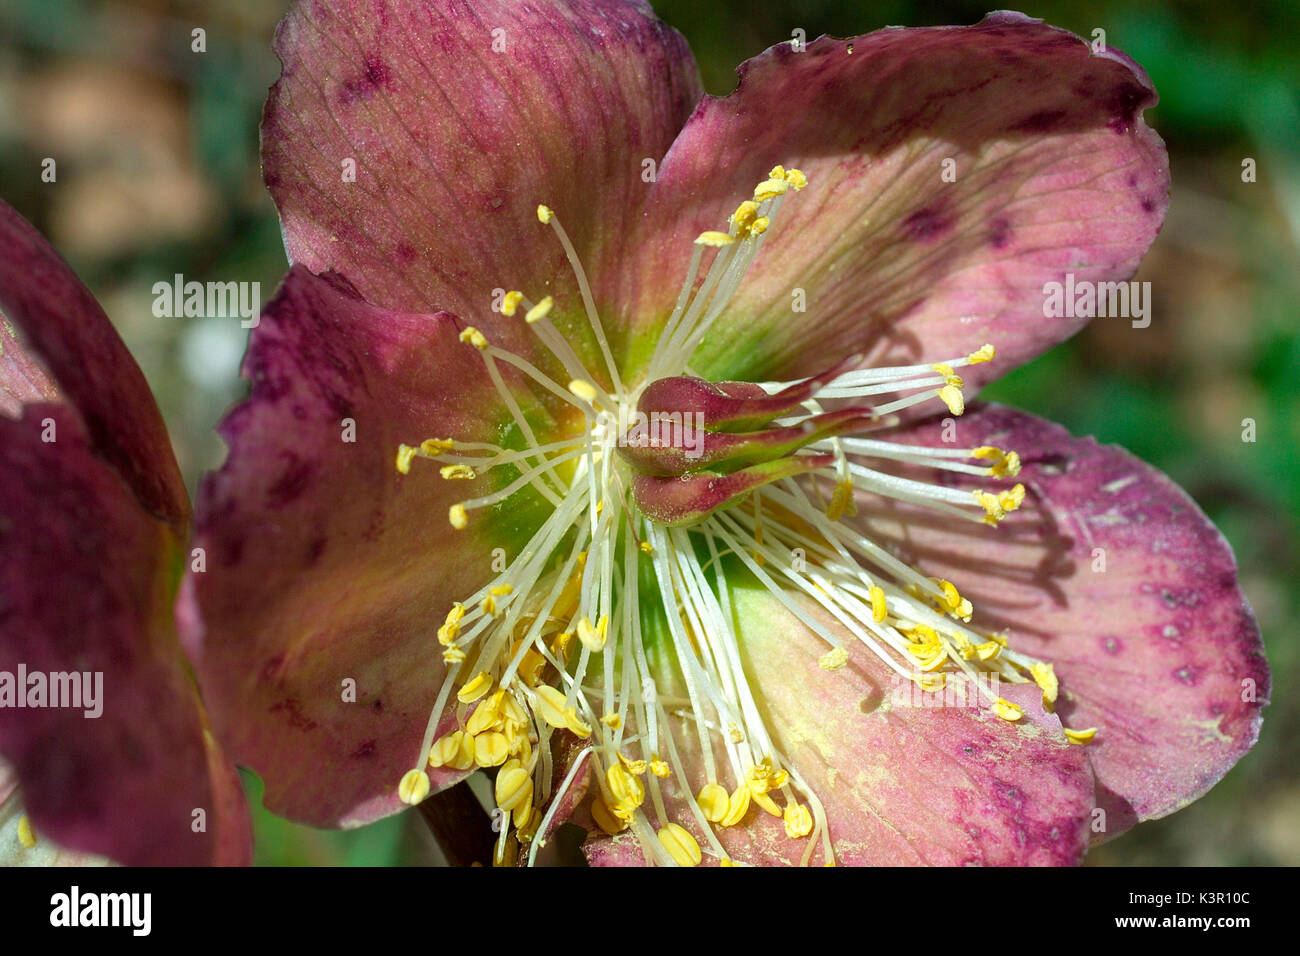 Helleborus niger, commonly called Christmas rose or black hellebore, is an evergreen perennial flowering plant in the buttercup family, Ranunculaceae Lombardy Italy Europe Stock Photo